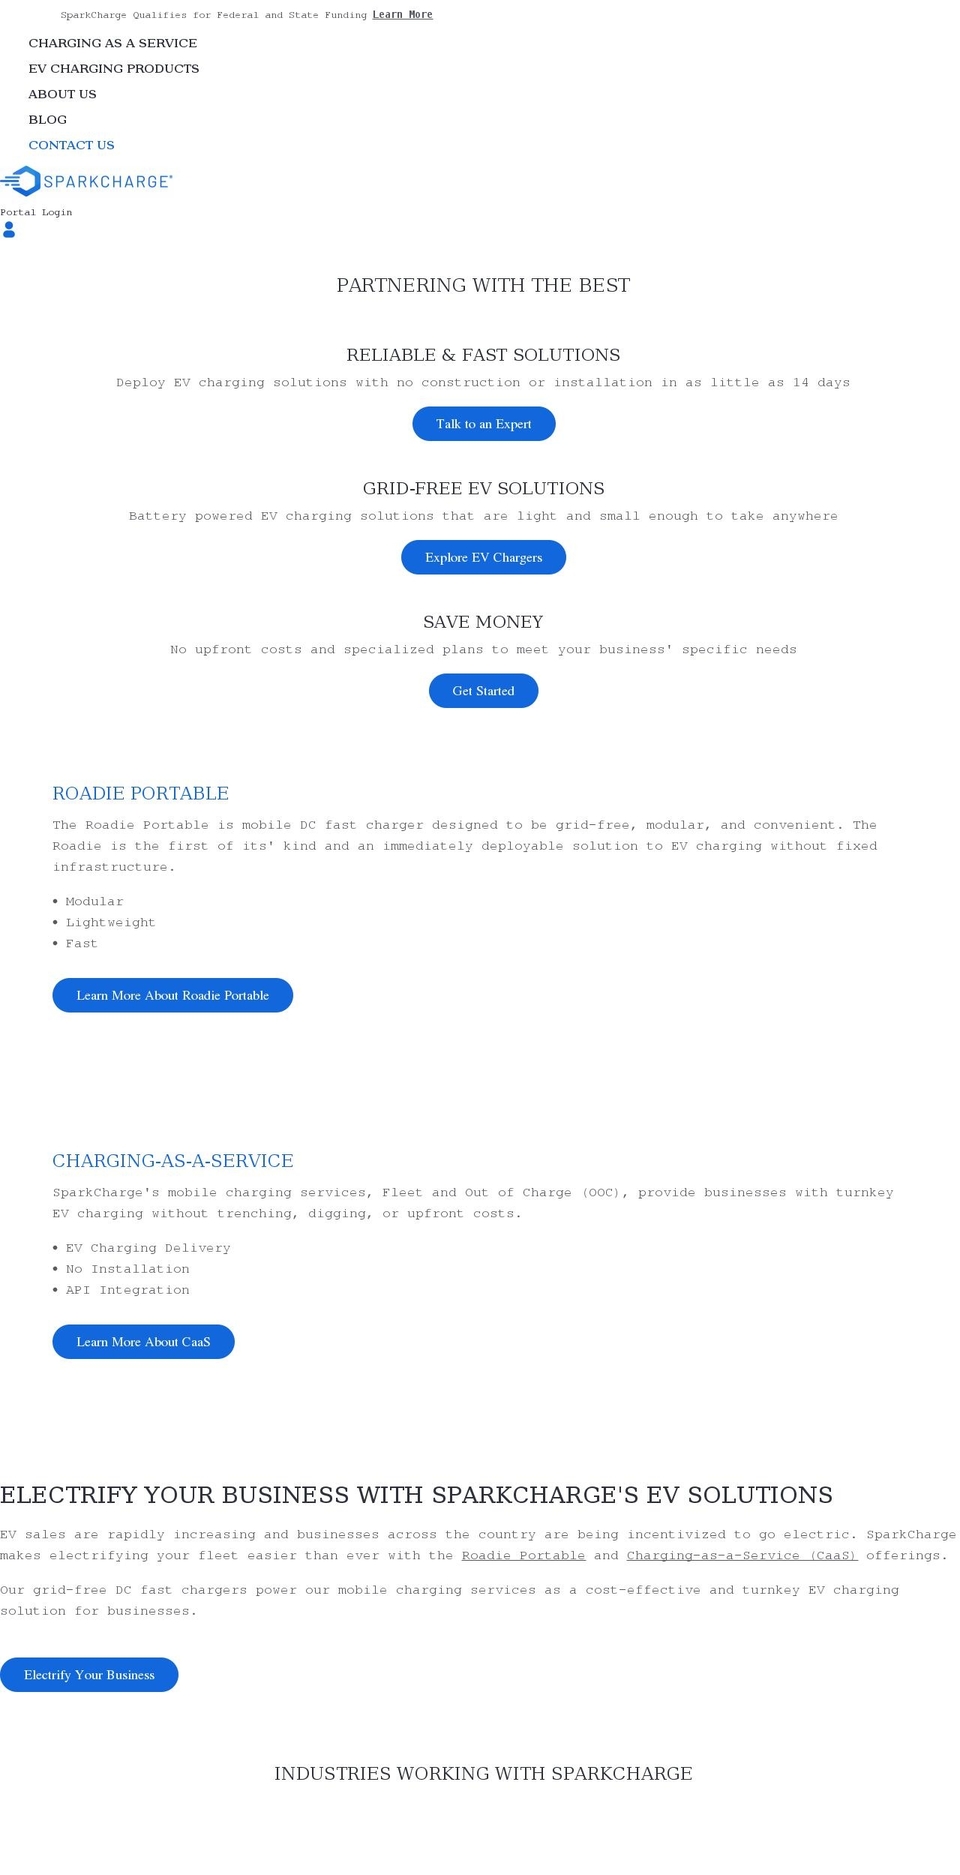 Spark Shopify theme site example sparkcharge.io